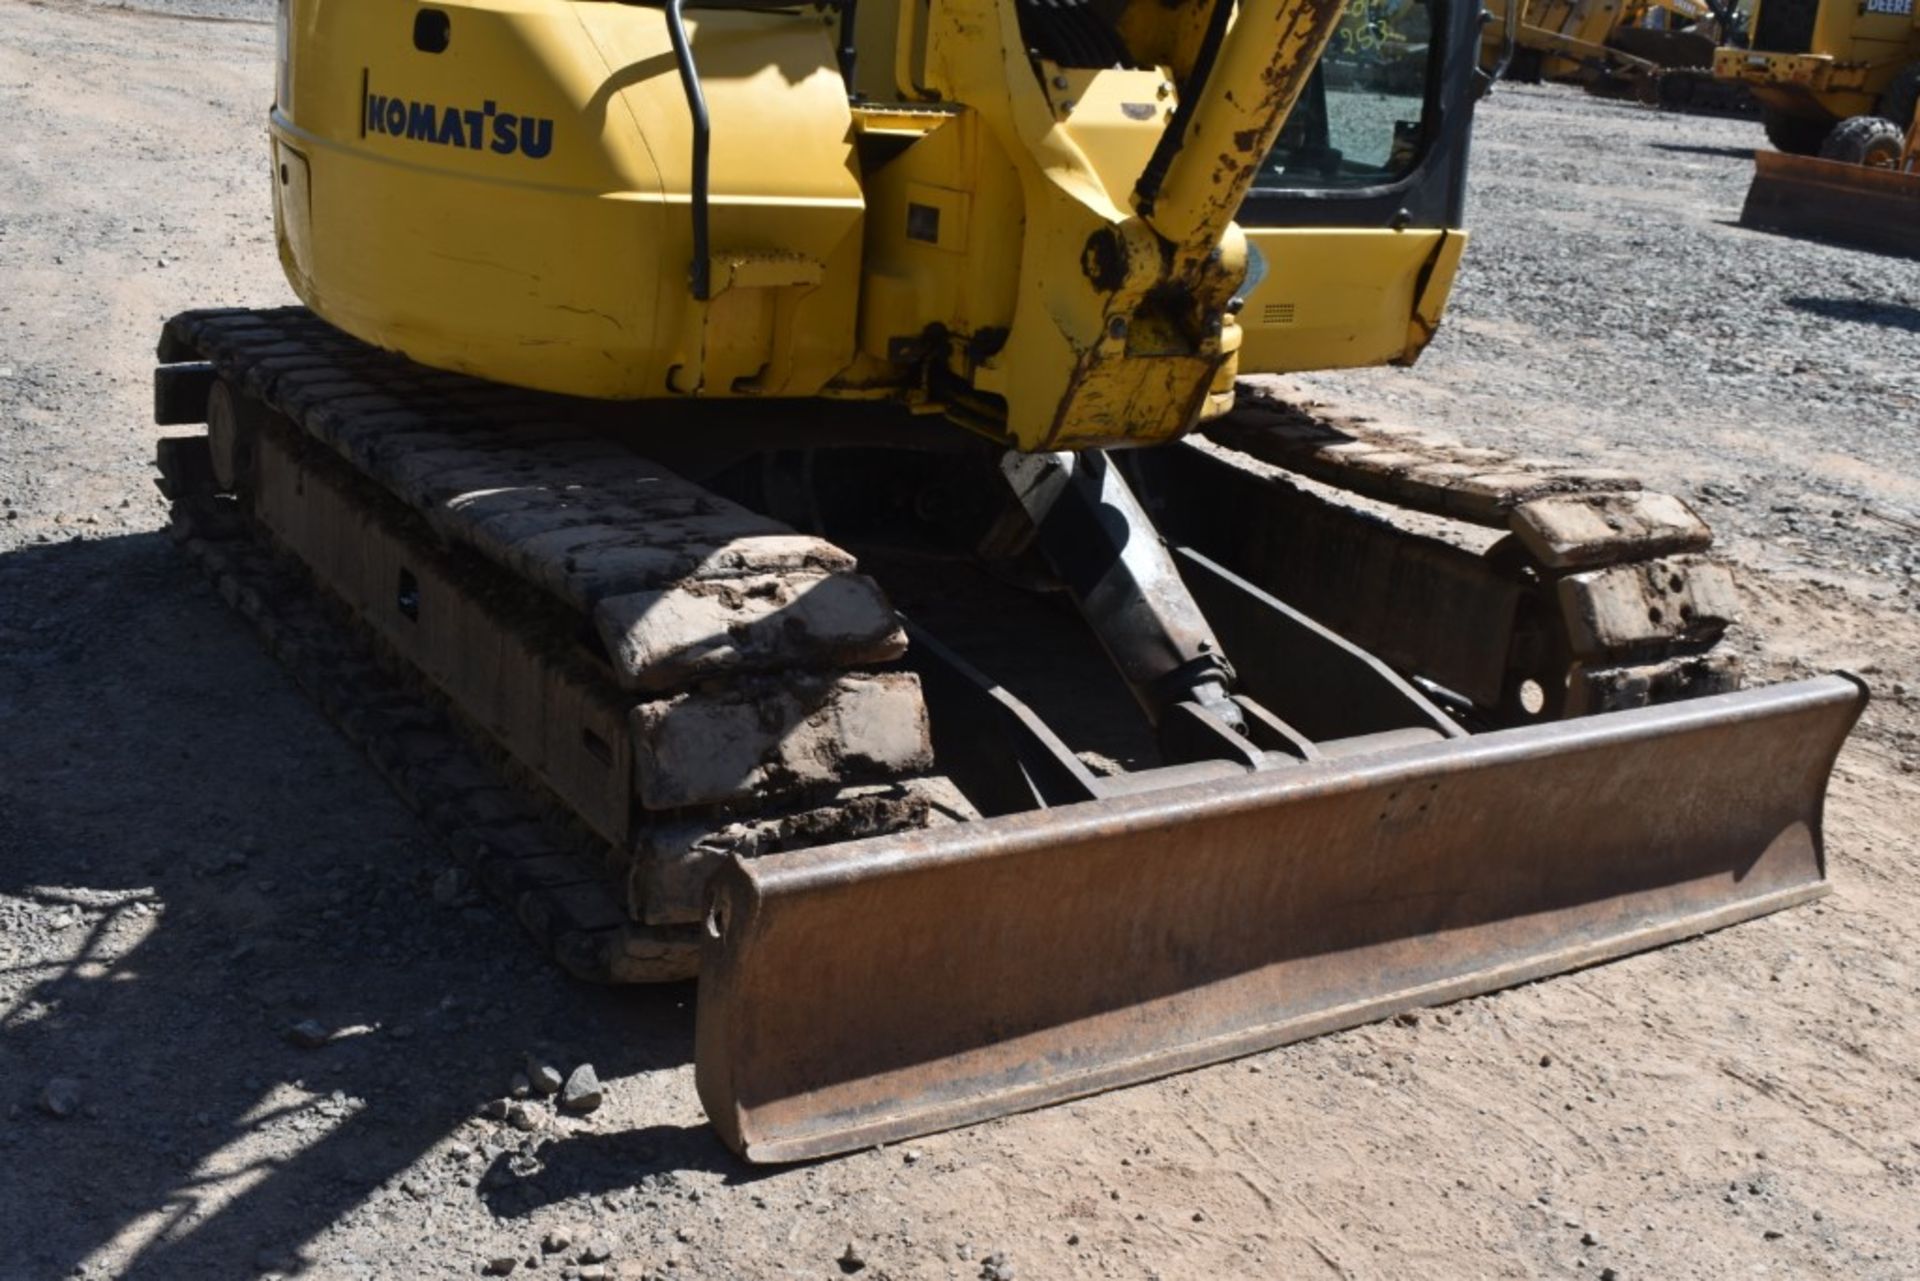 Komatsu PC88MR-8 Excavator 8704 Hours, Runs and Operates, WB 24" Bucket, Quick Coupler, Auxiliary - Image 15 of 49